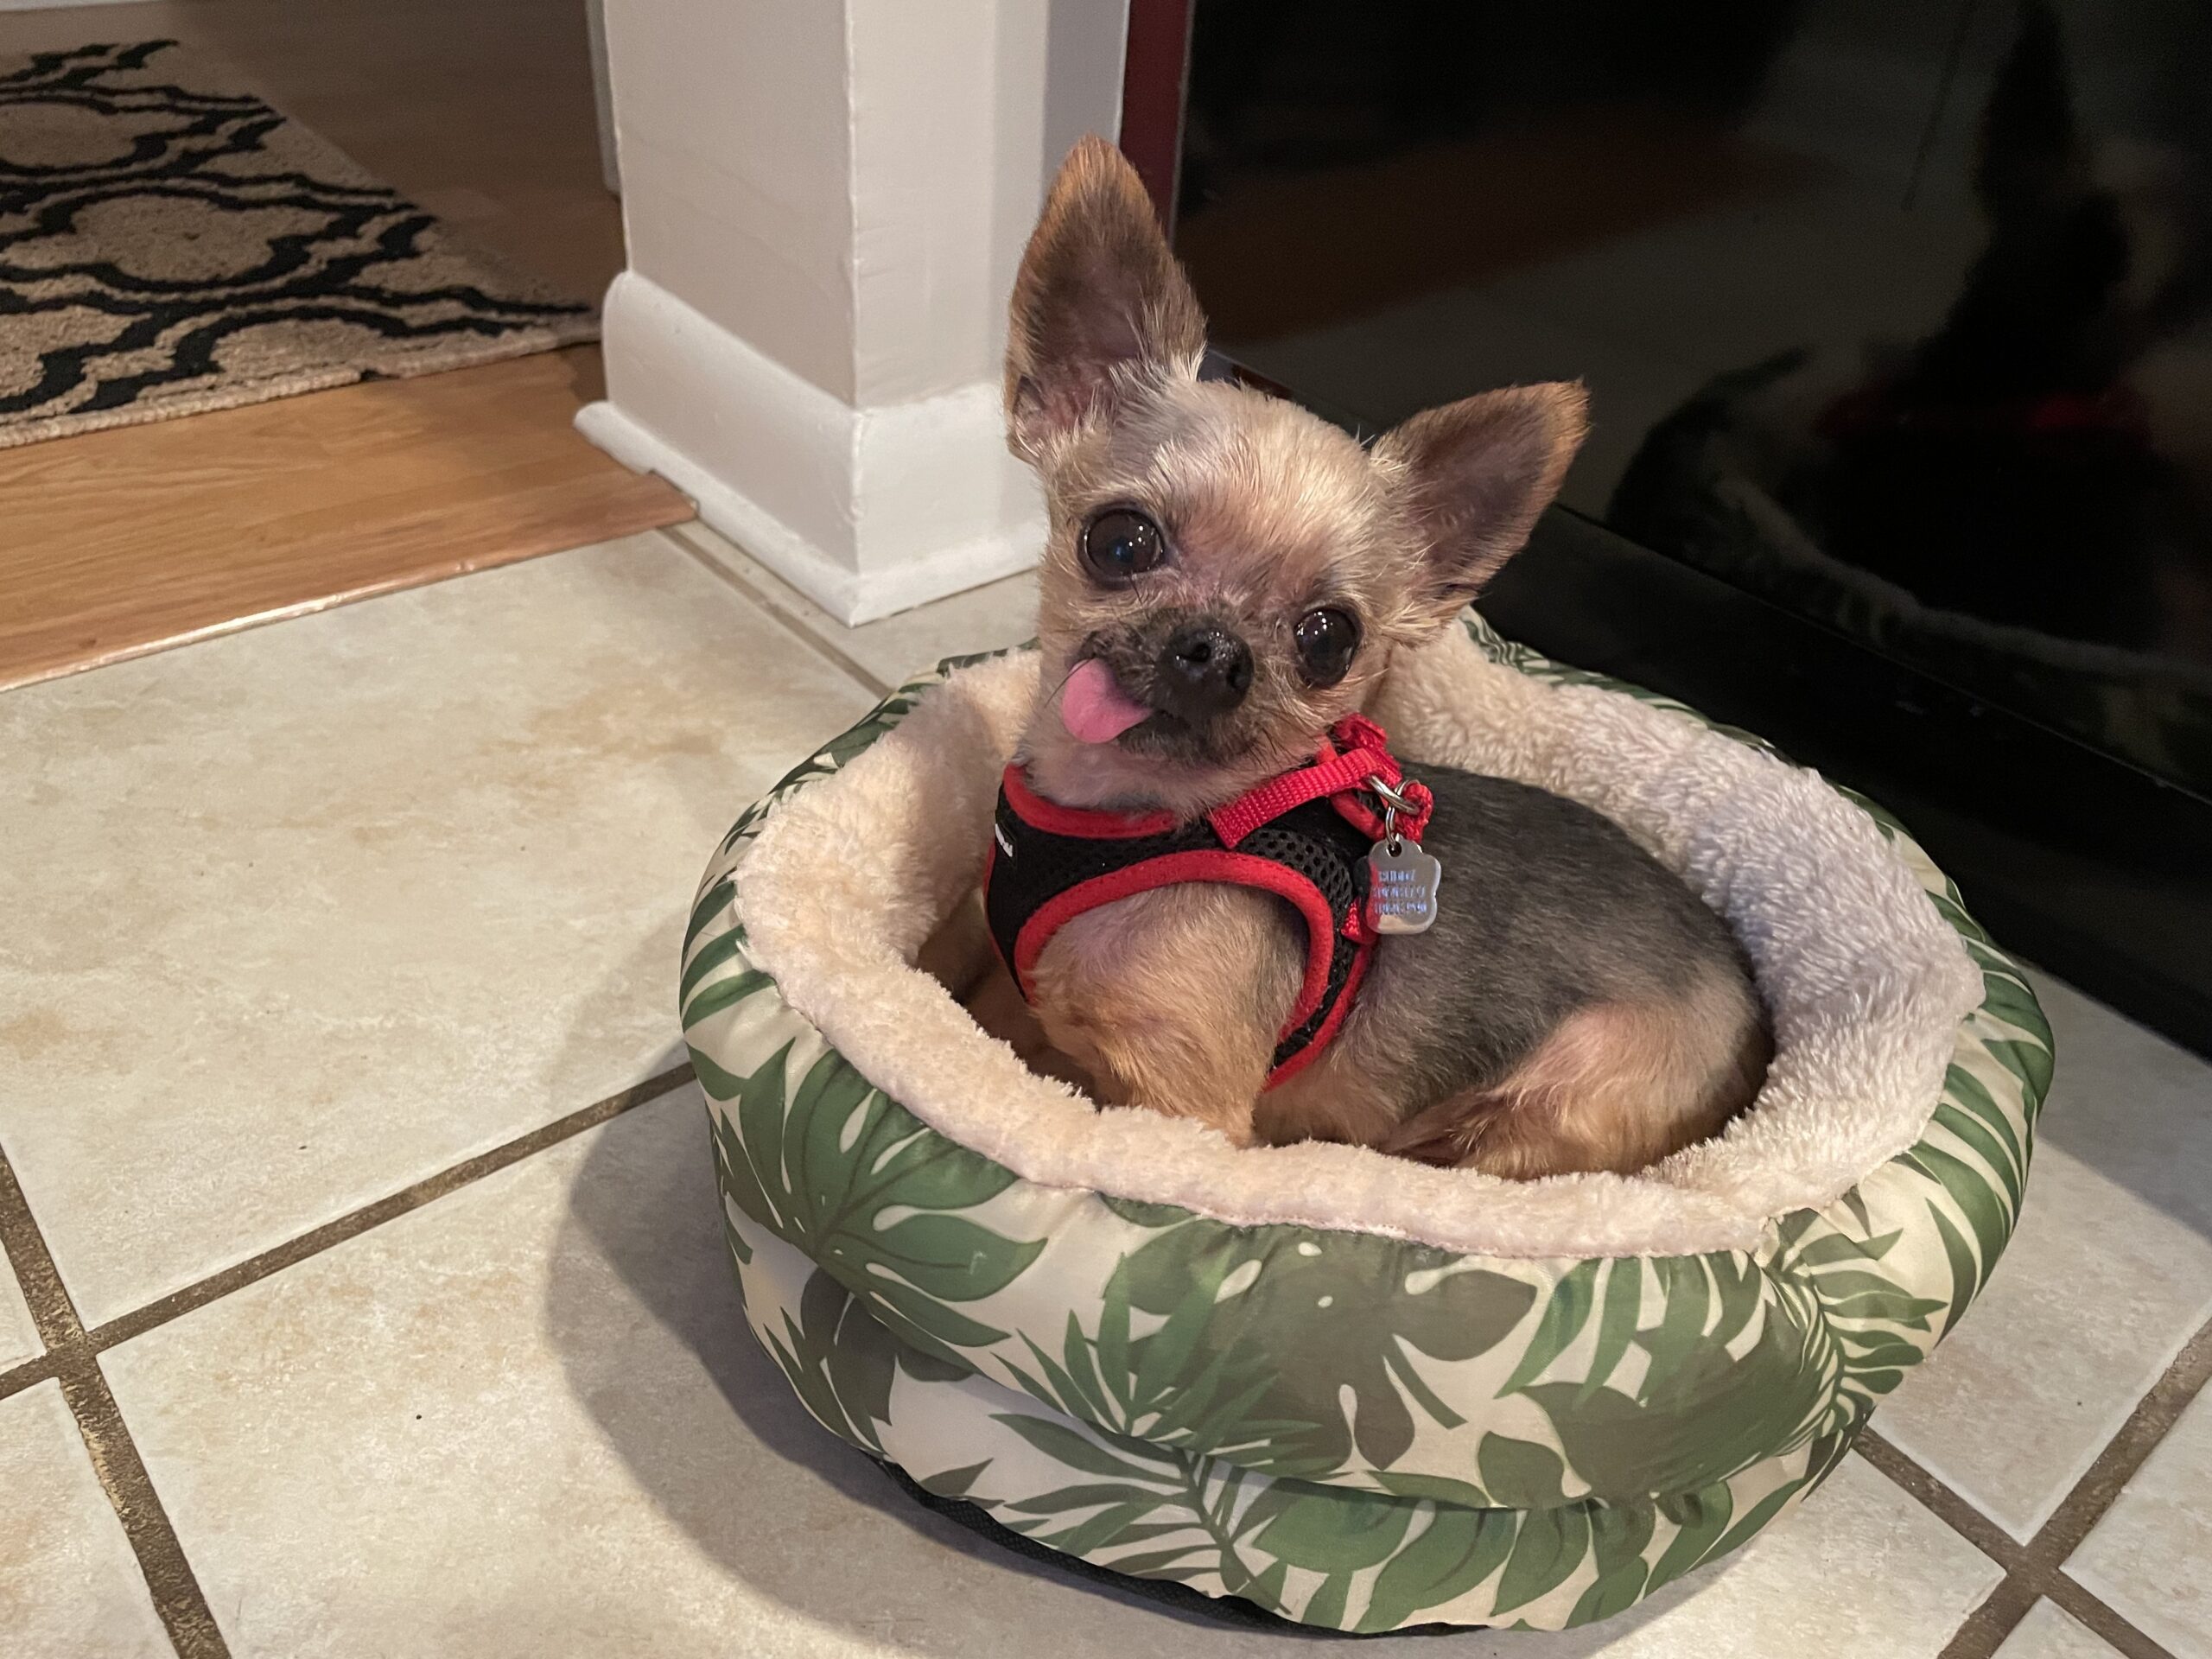 Buddy, who came from a puppy mill, made a full recovery in a loving foster home. COURTESY SOUTHAMPTON ANIMAL SHELTER FOUNDATION